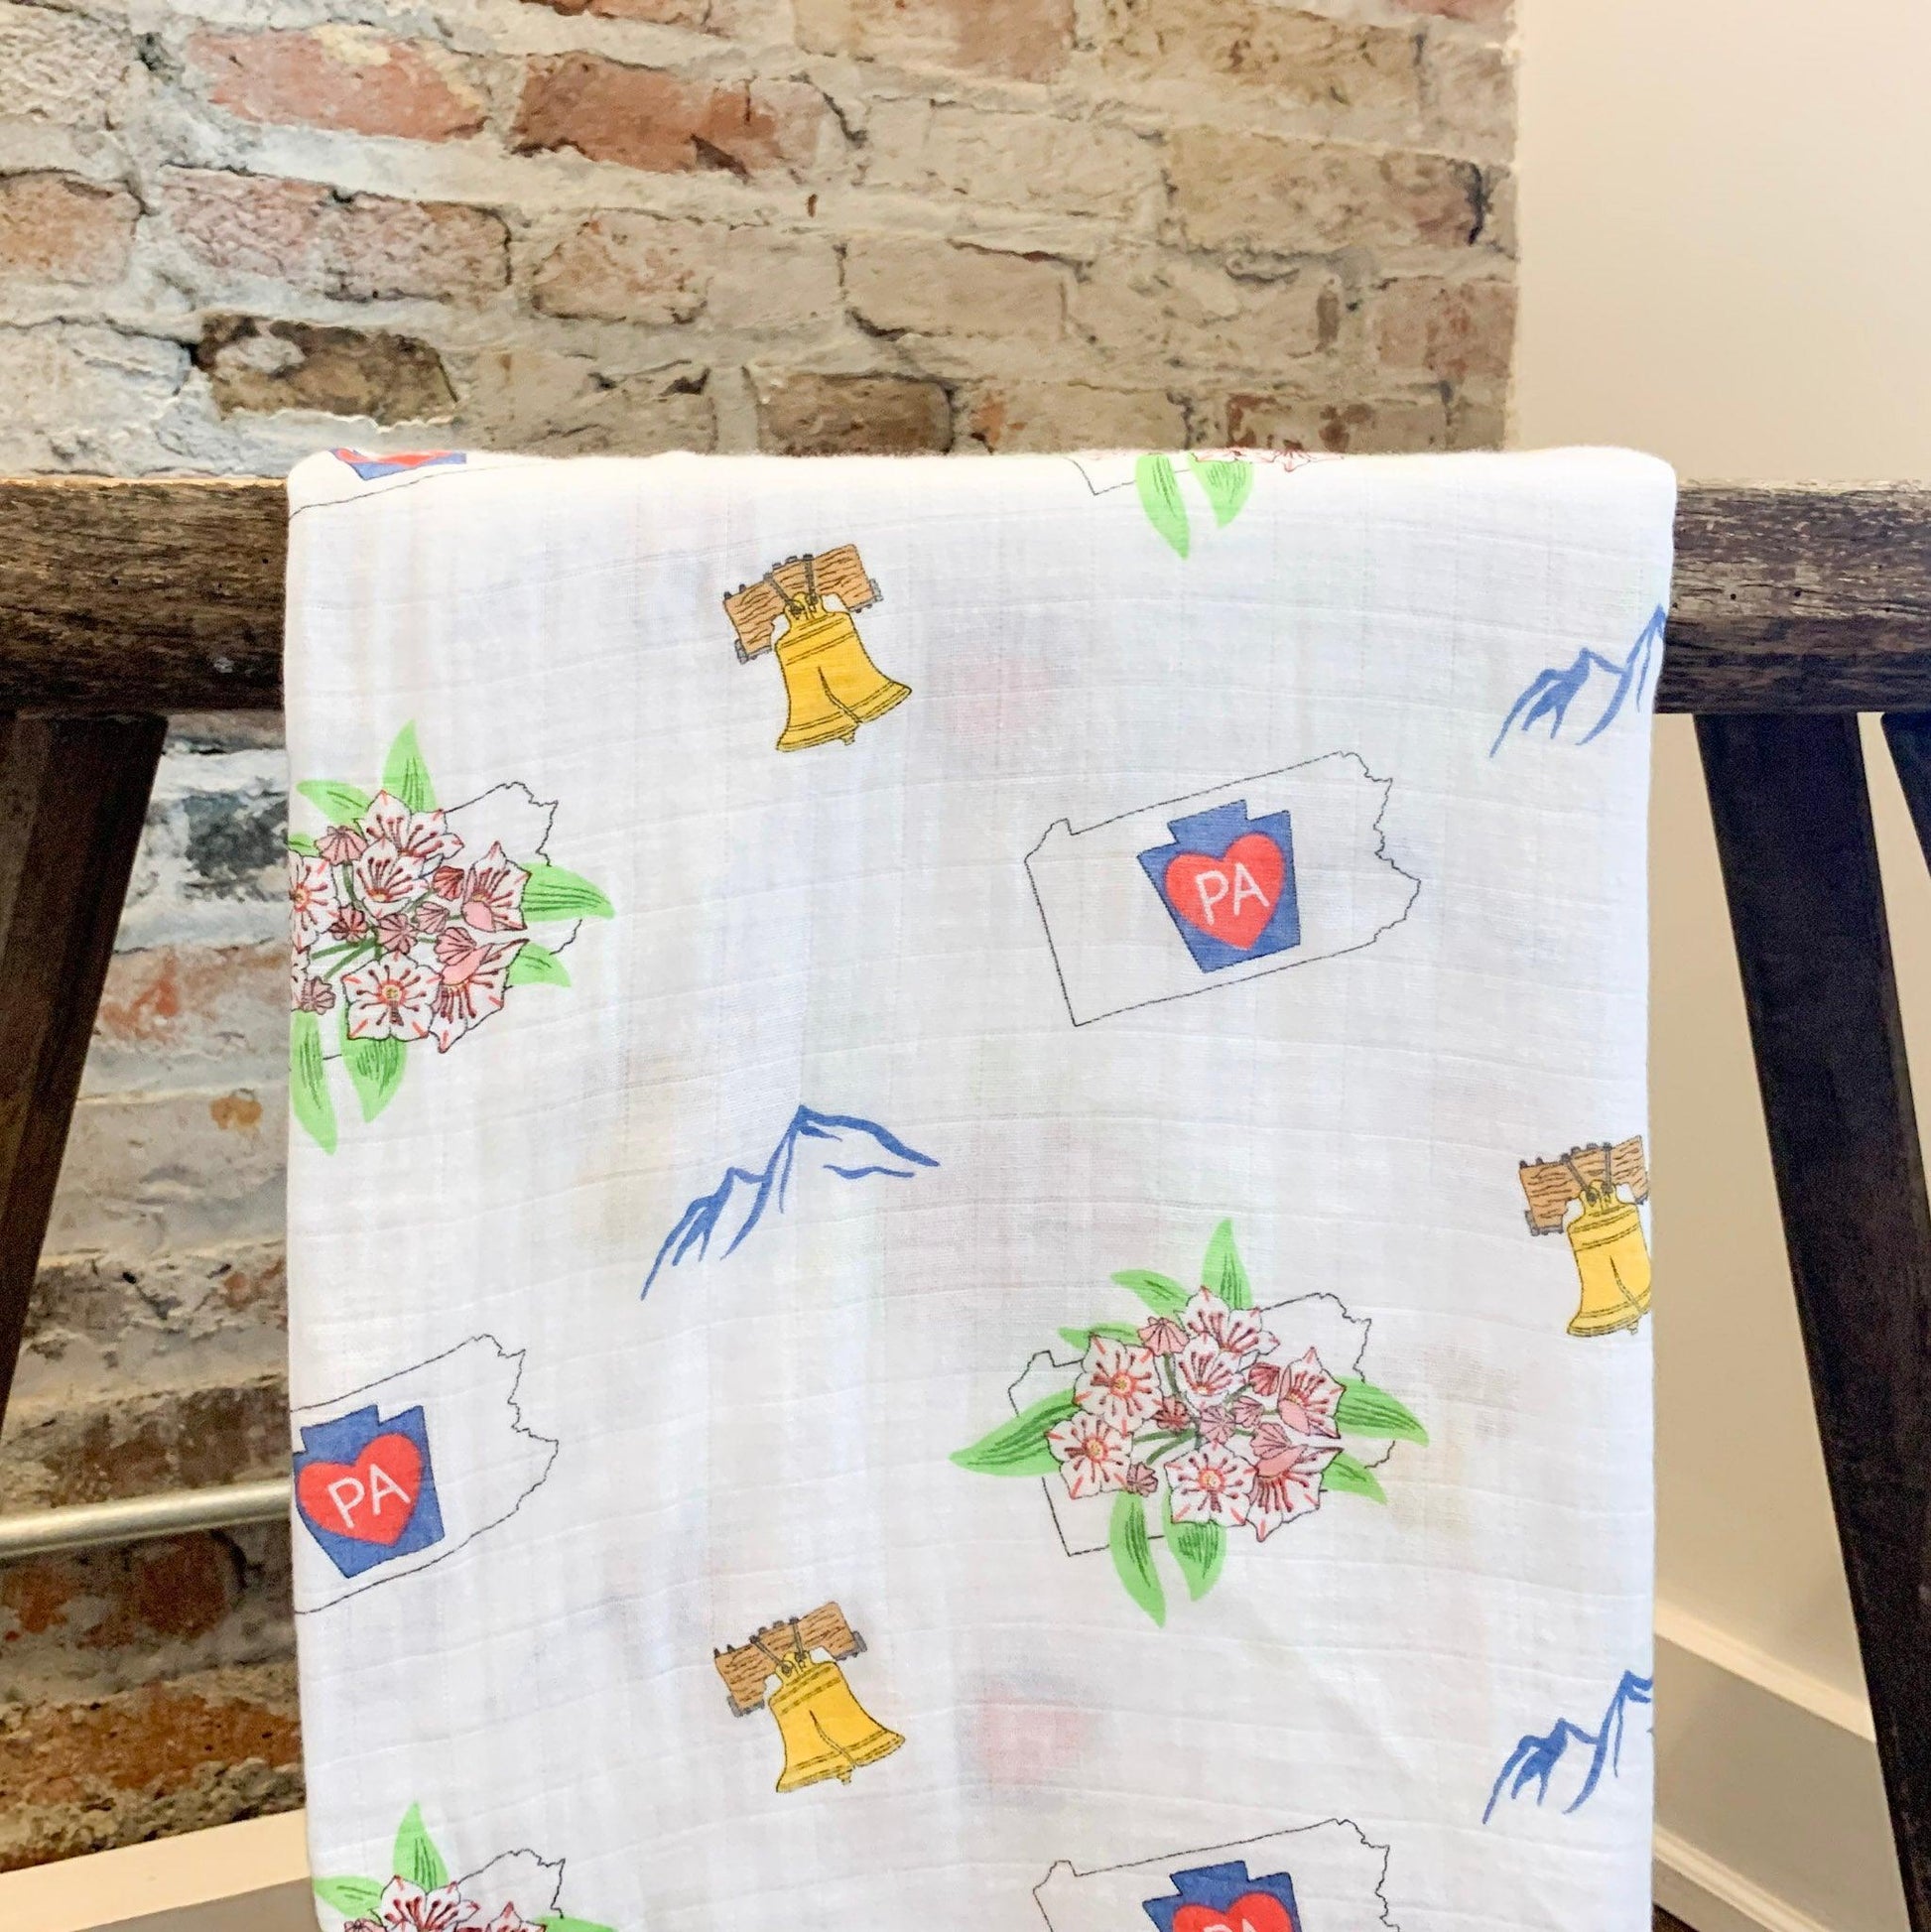 Pennsylvania-themed baby muslin swaddle blanket with state icons like Liberty Bell, covered bridges, and barns.